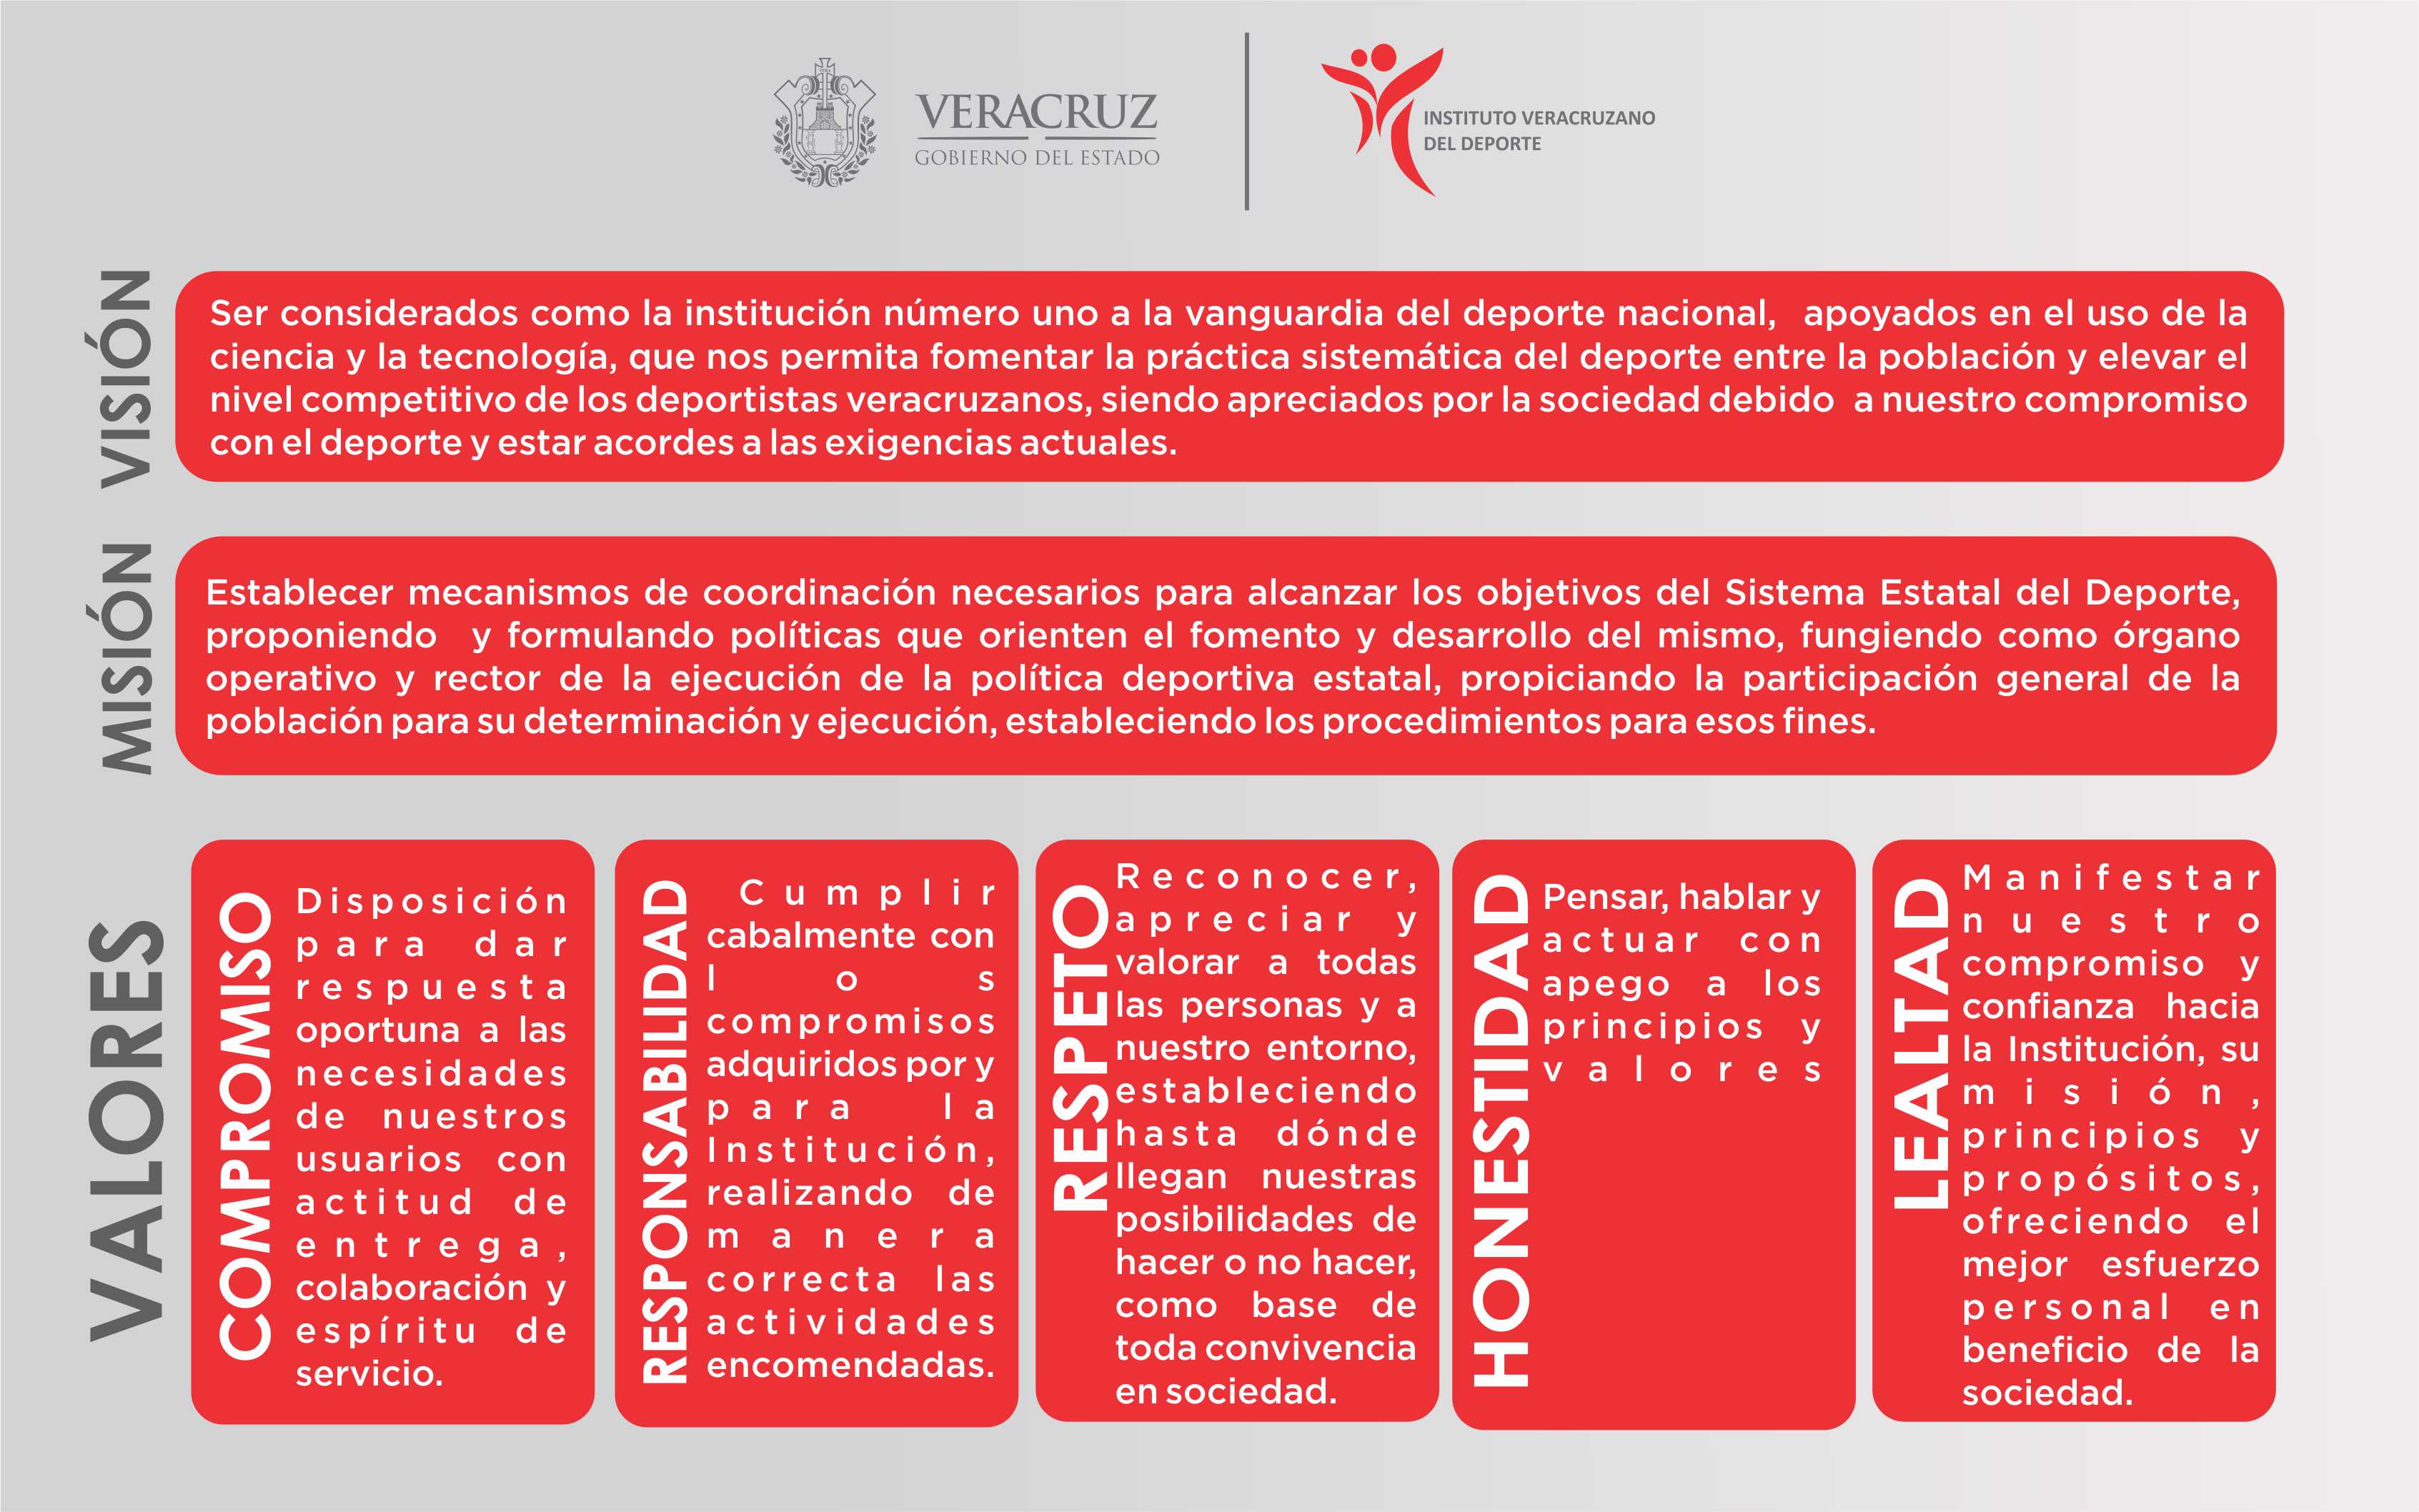 MISION VISION VALORES IVD-2016